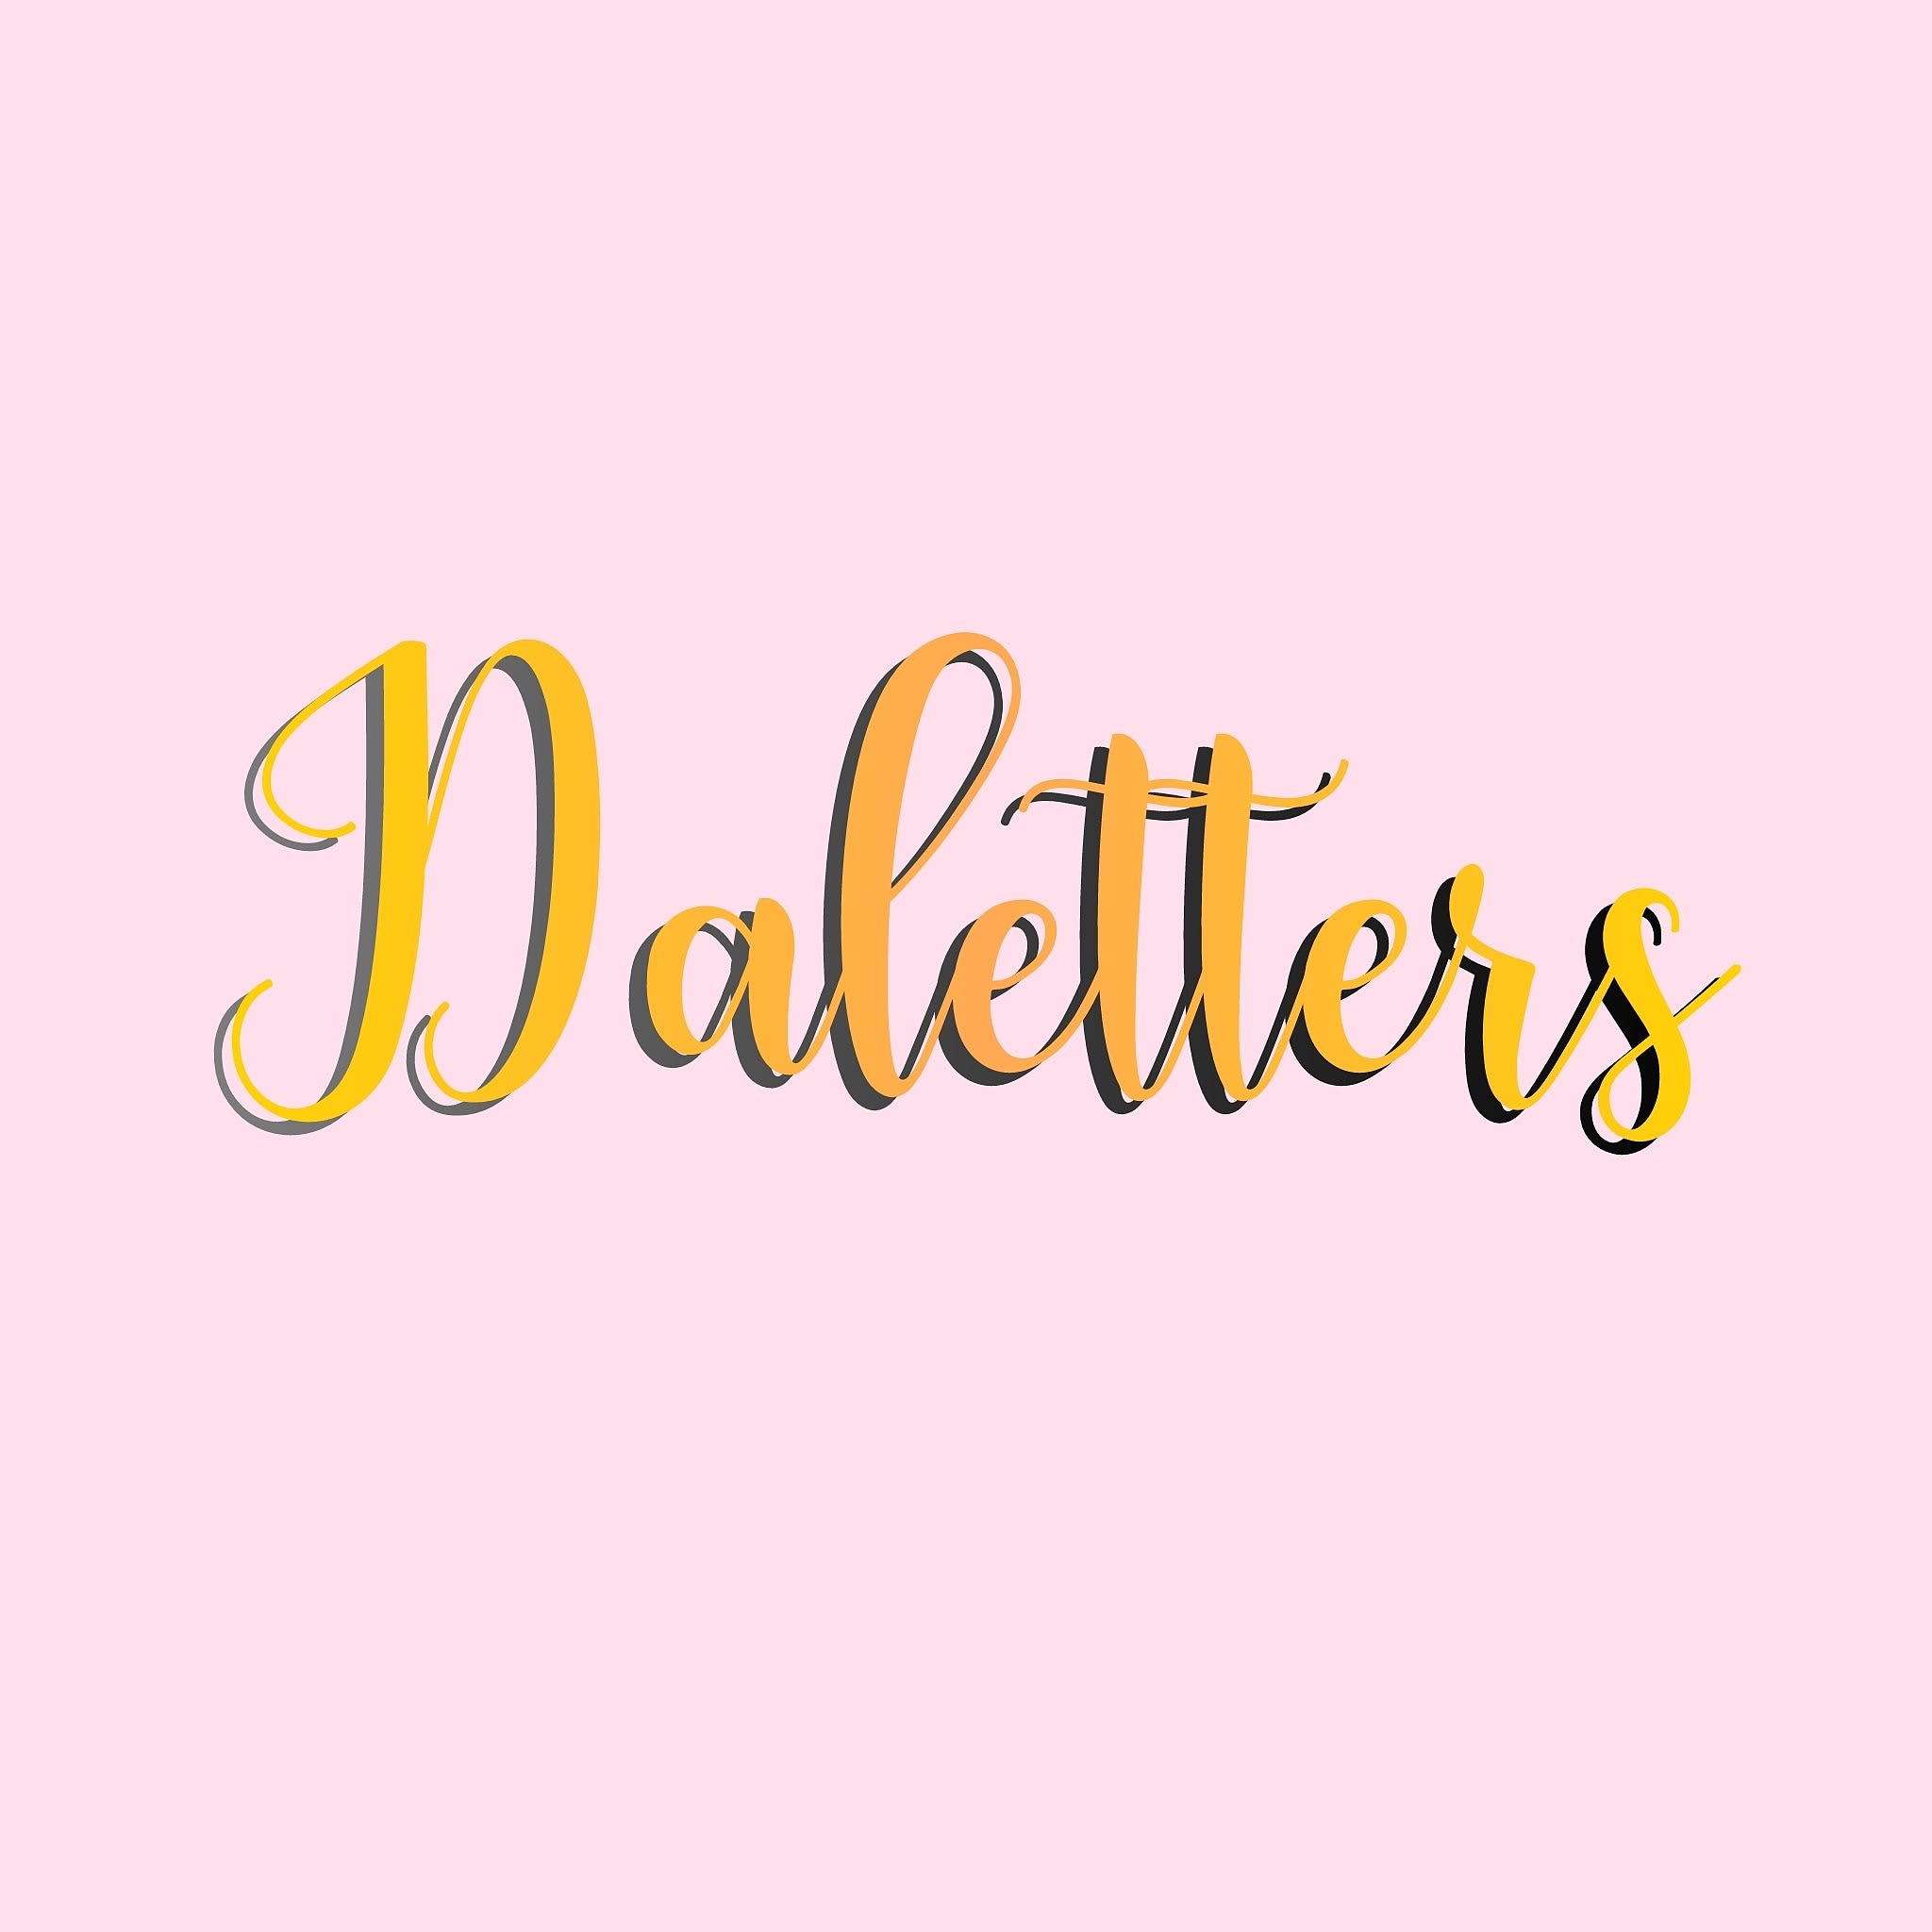 Daletters